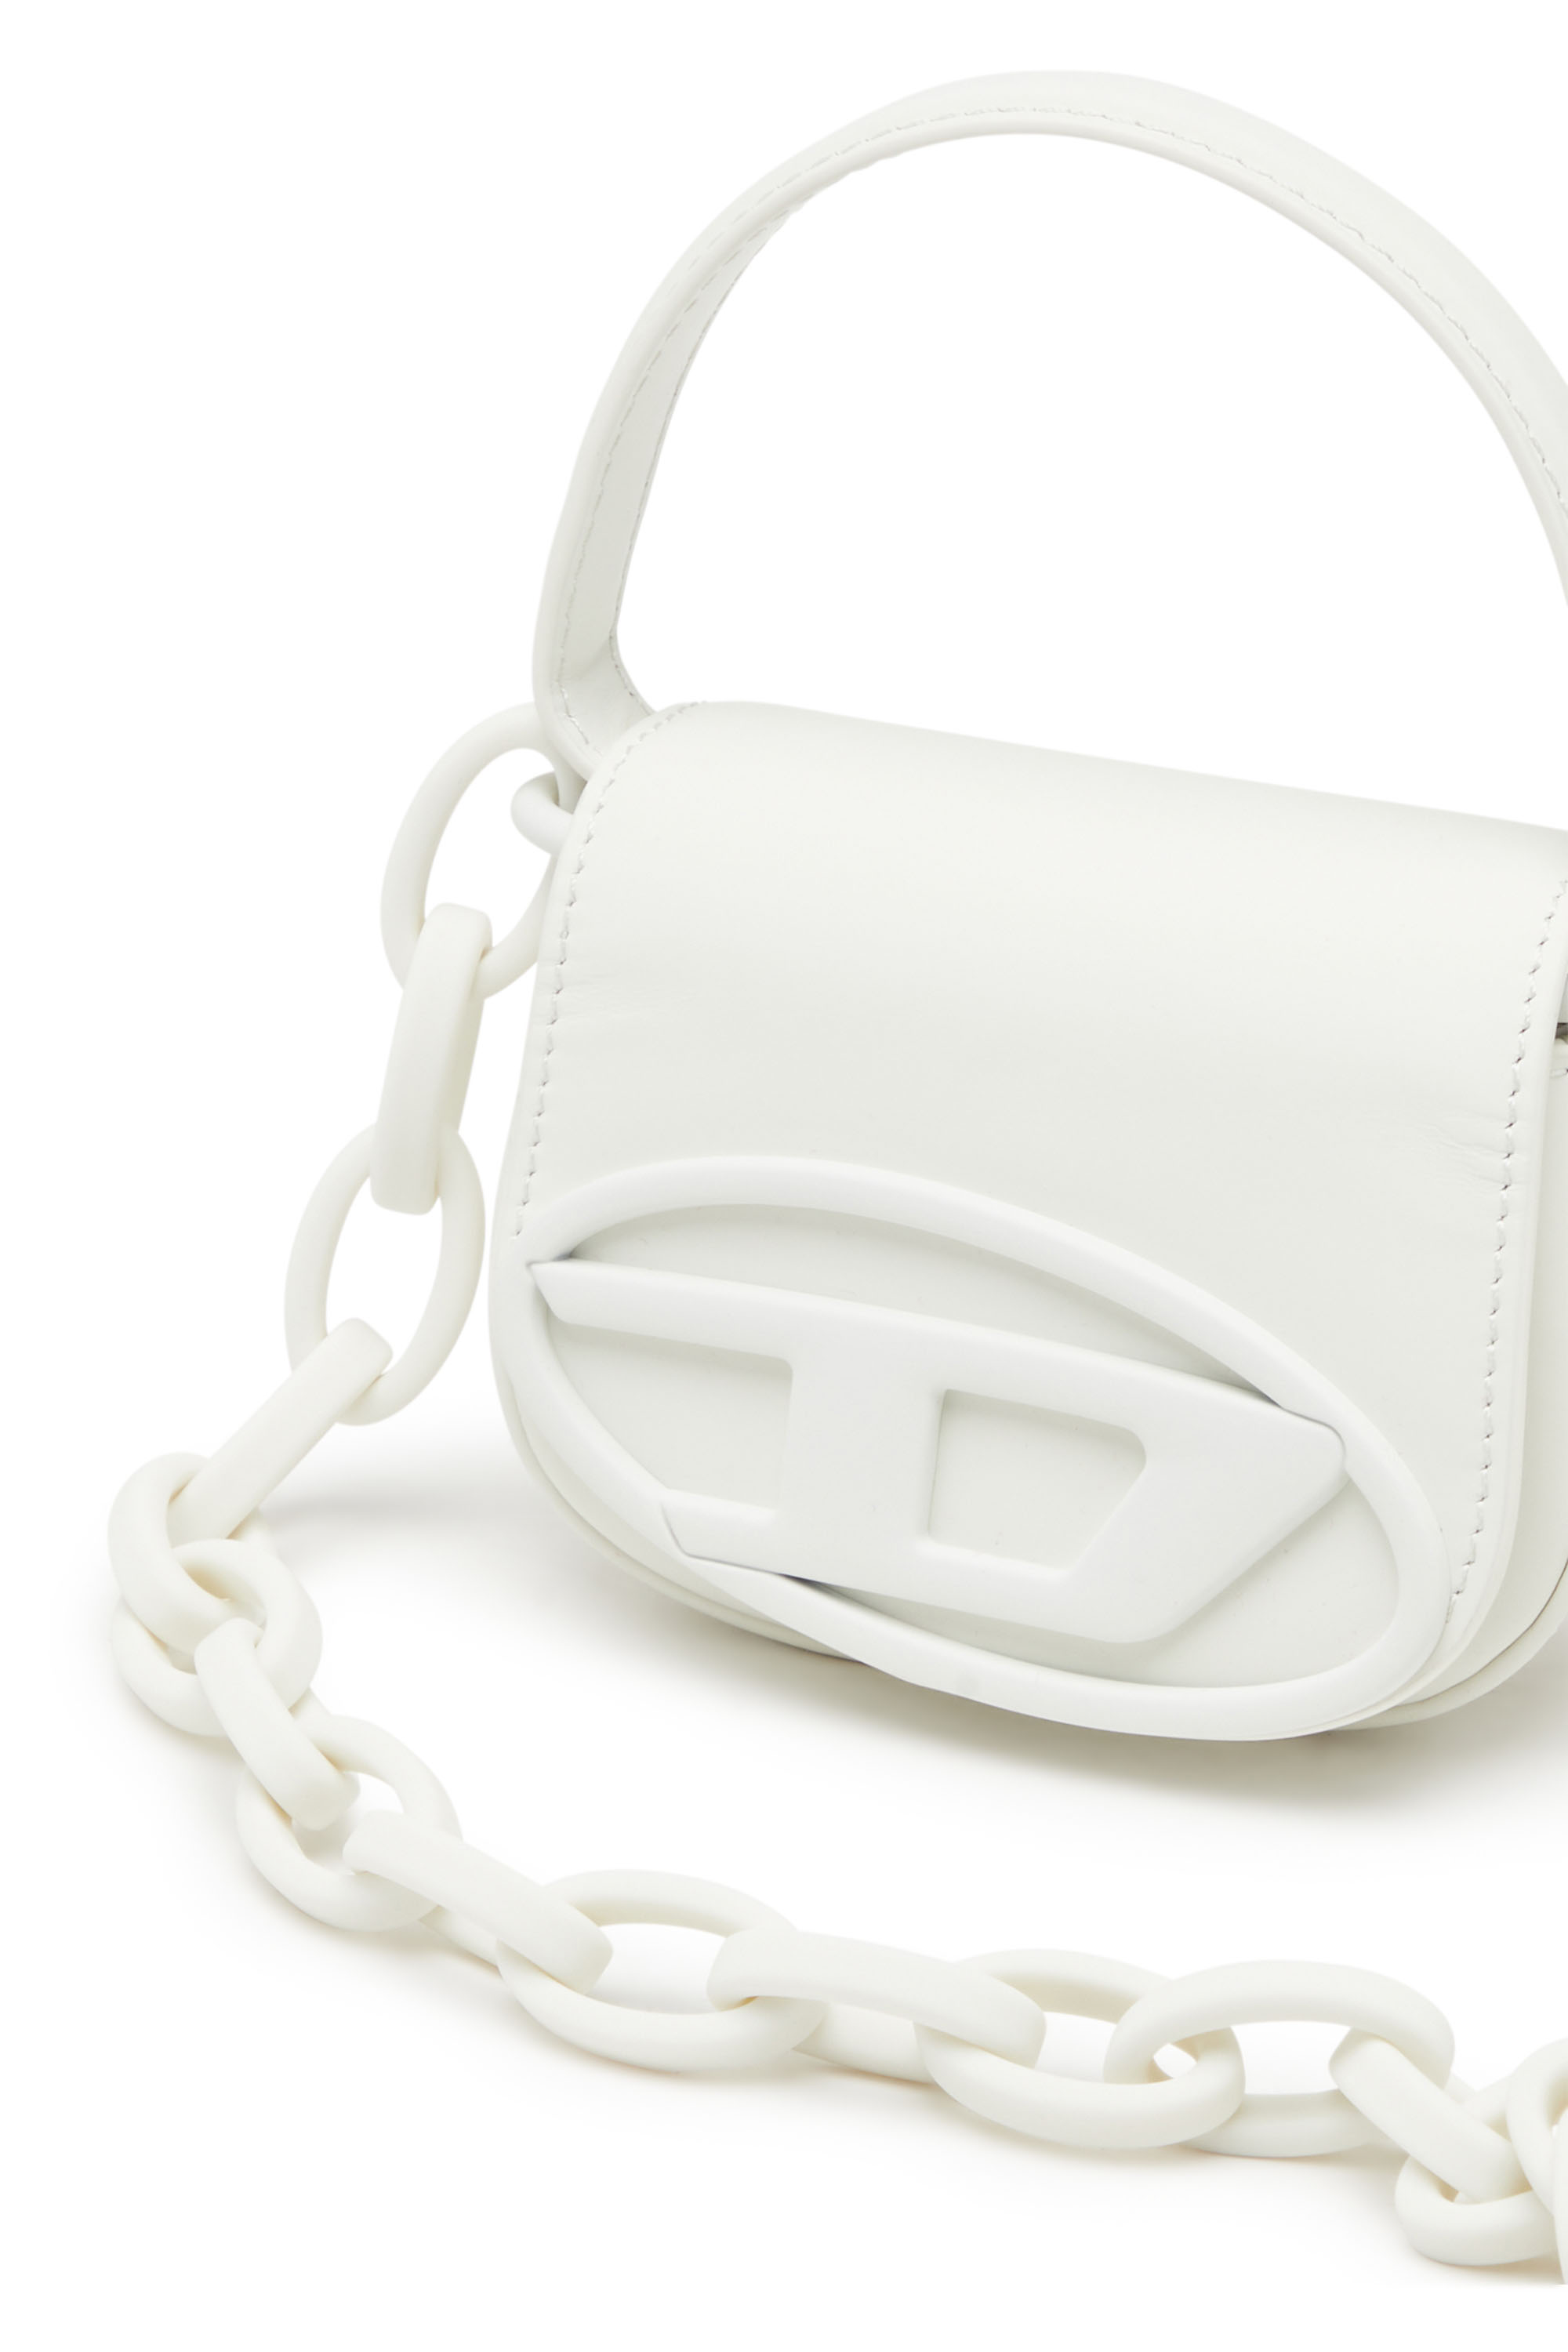 Diesel - 1DR XS, Female 1DR Xs-Iconic mini bag in matte leather in ホワイト - Image 5